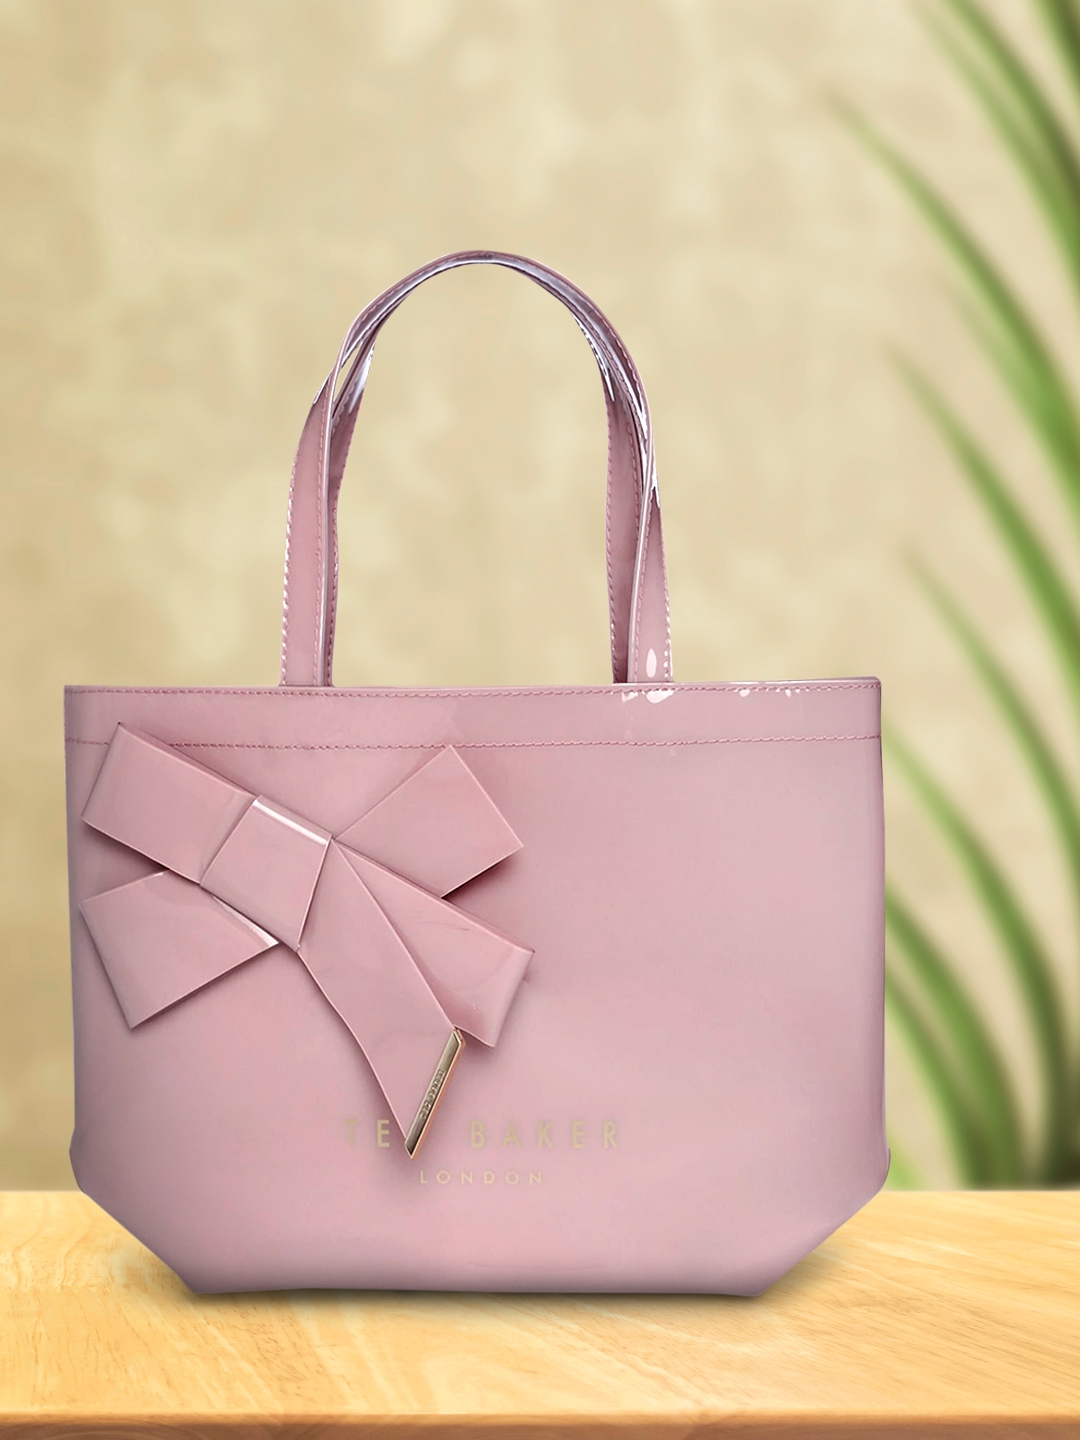 Ted Baker Pink Shopper Handheld Bag with Bow Detail